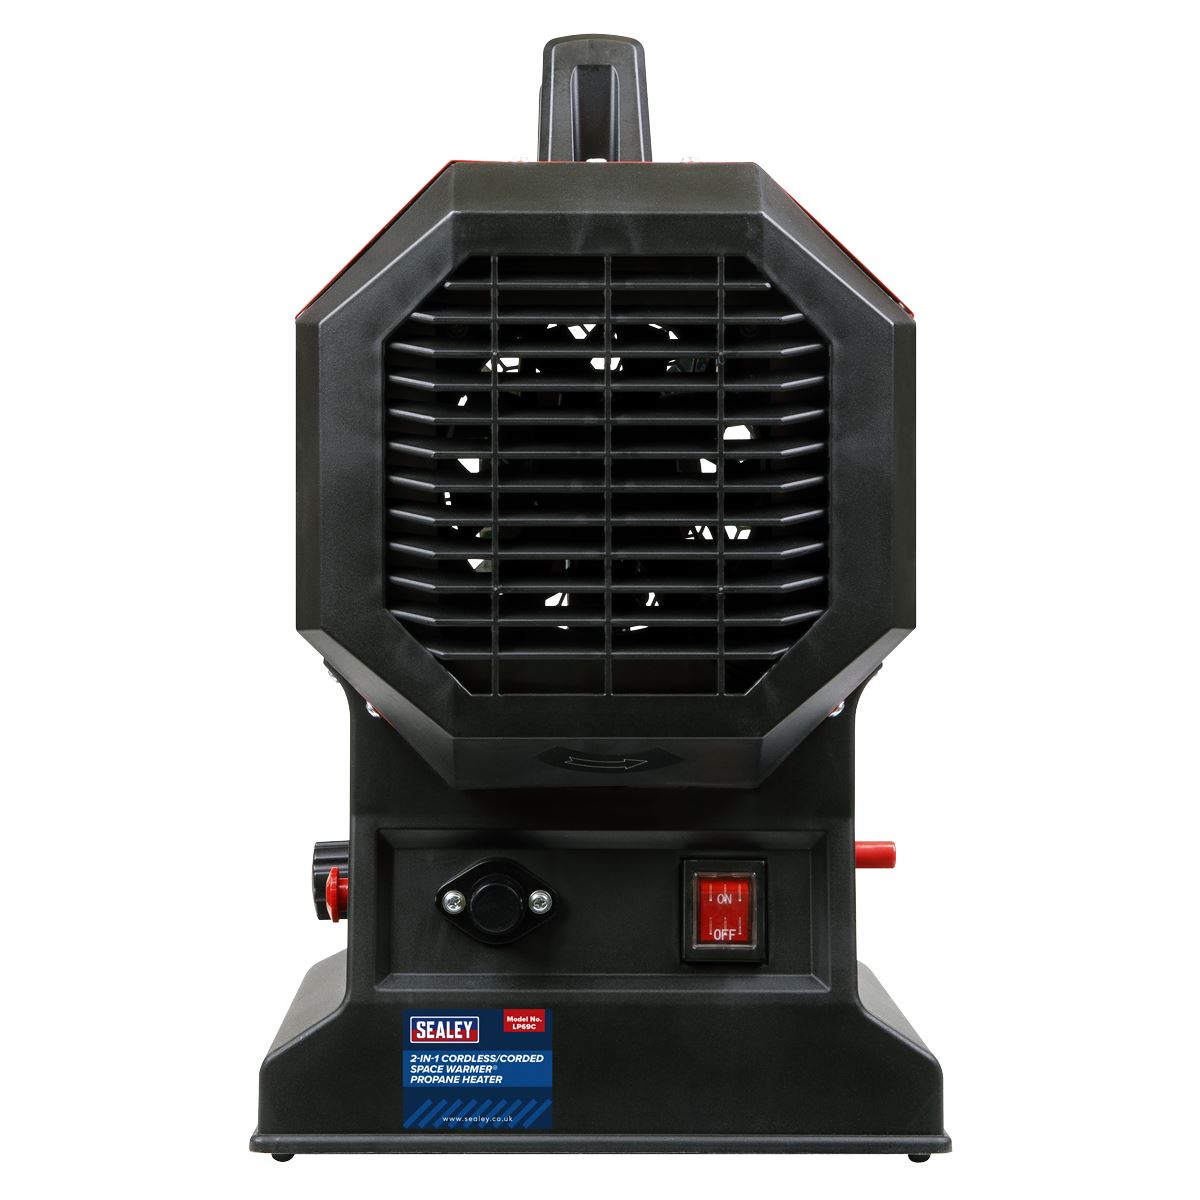 Sealey 230V with Cordless Option Space Warmer® Propane Heater 30,000-68,000Btu/hr (9-20kW)